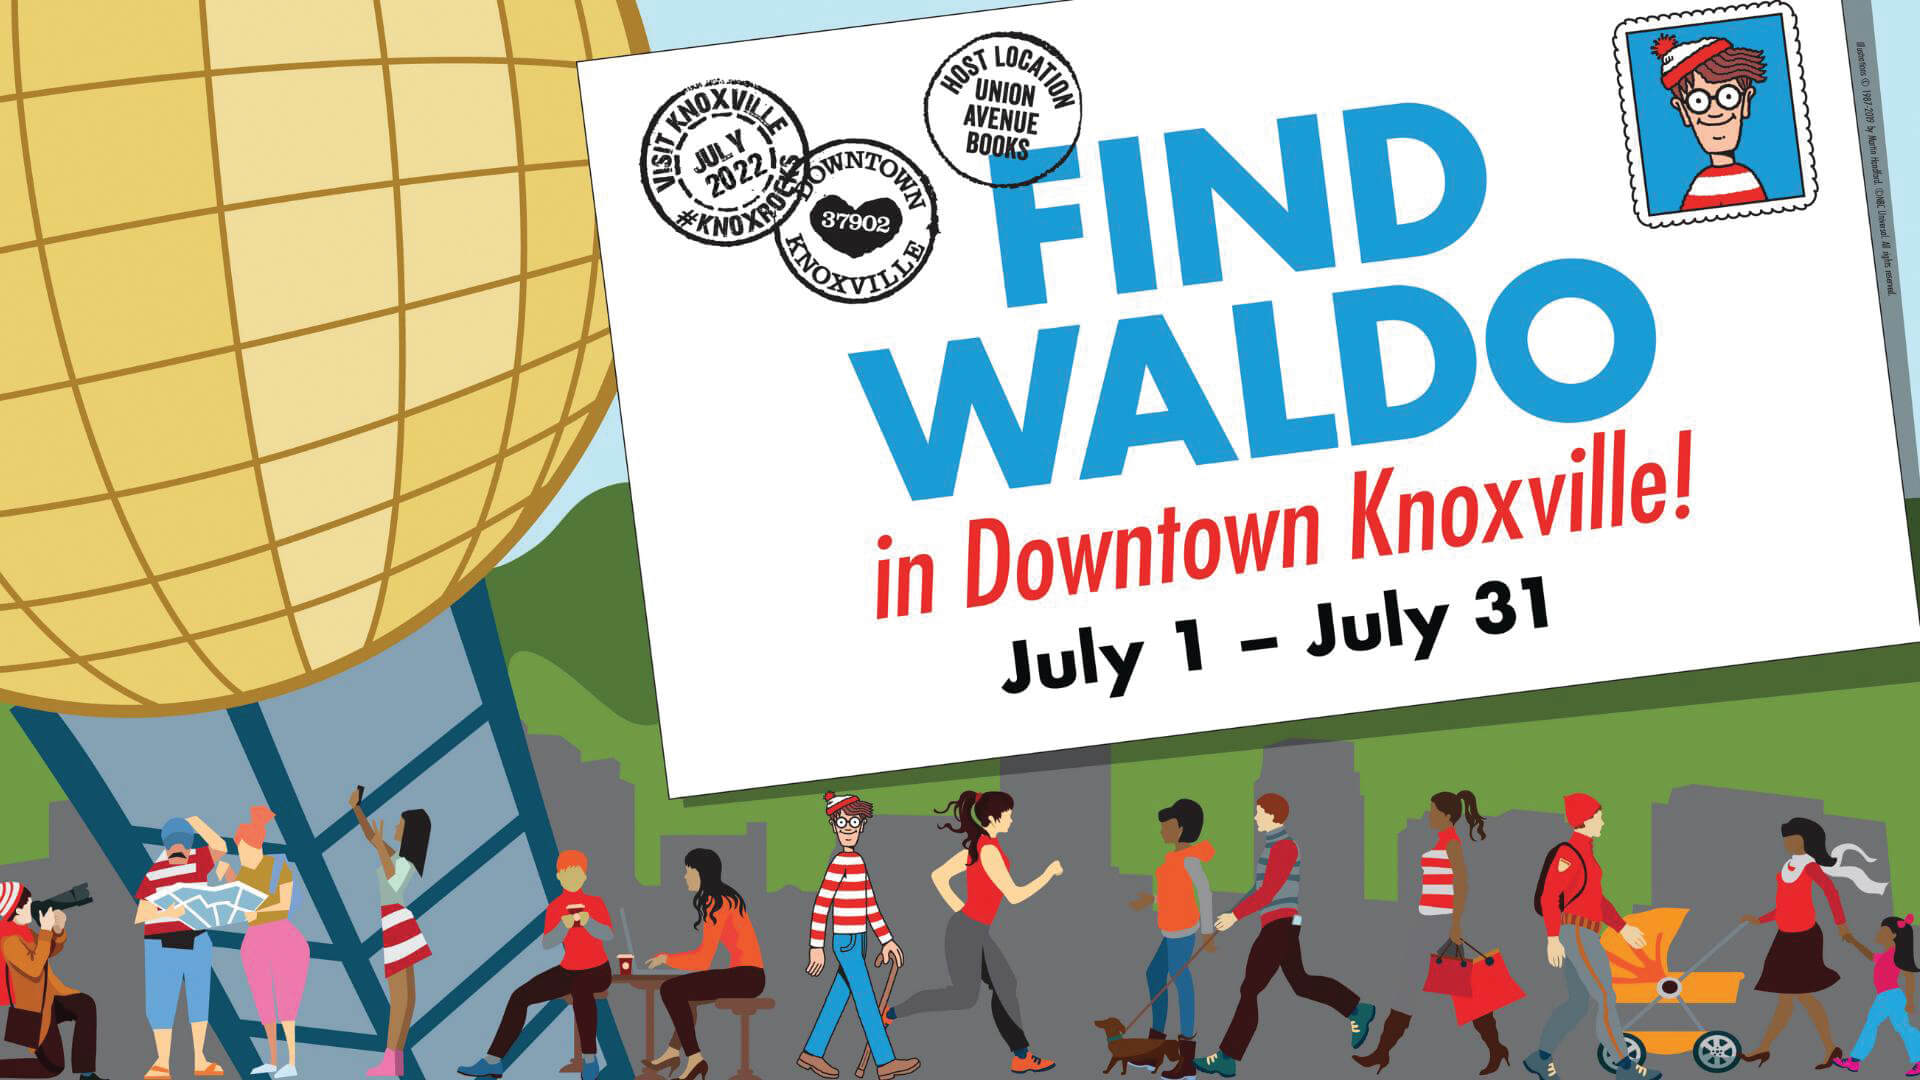 Find Waldo in Downtown Knoxville